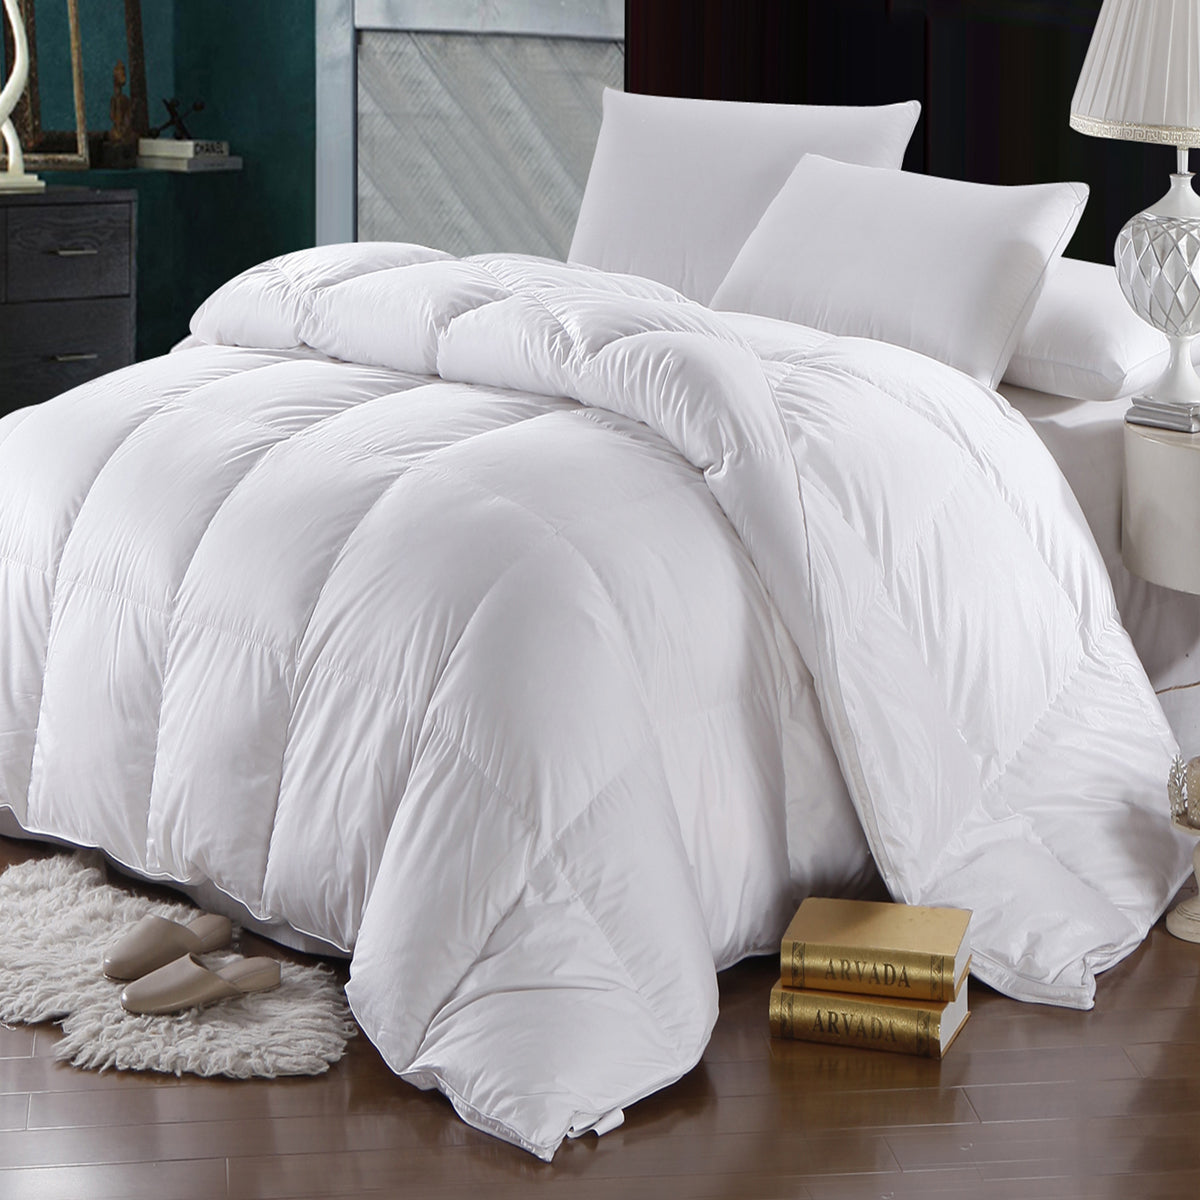 How to Choose a Duvet or Comforter